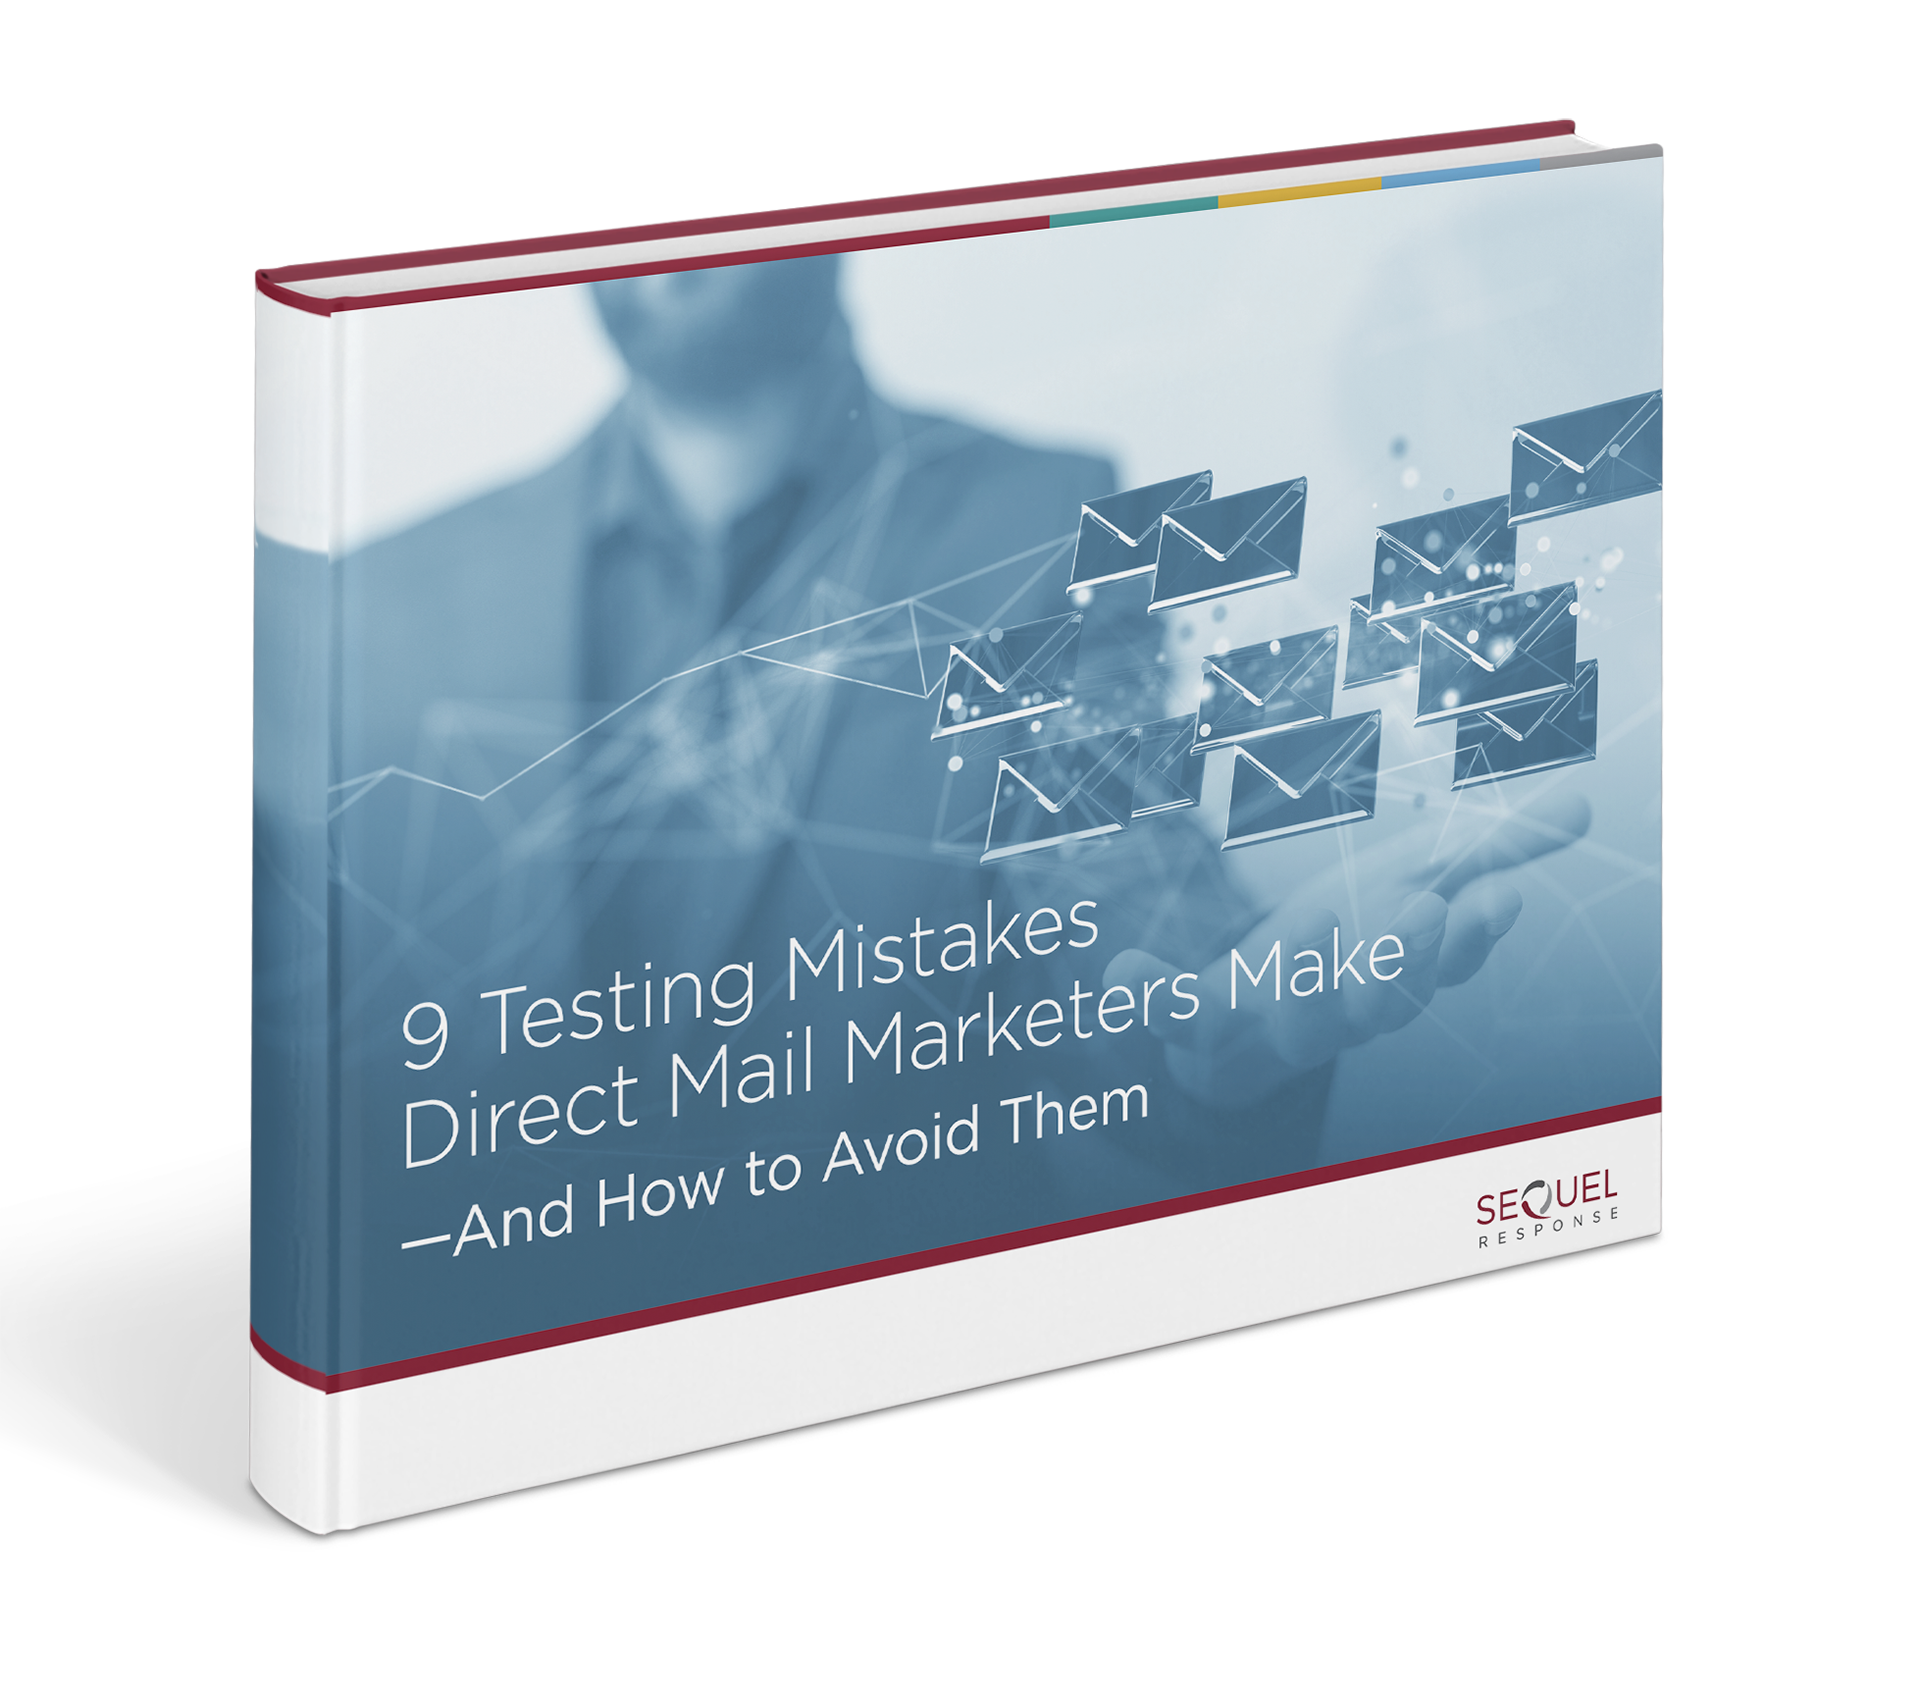 9 Testing Mistakes Direct Mail Marketers Make ebook